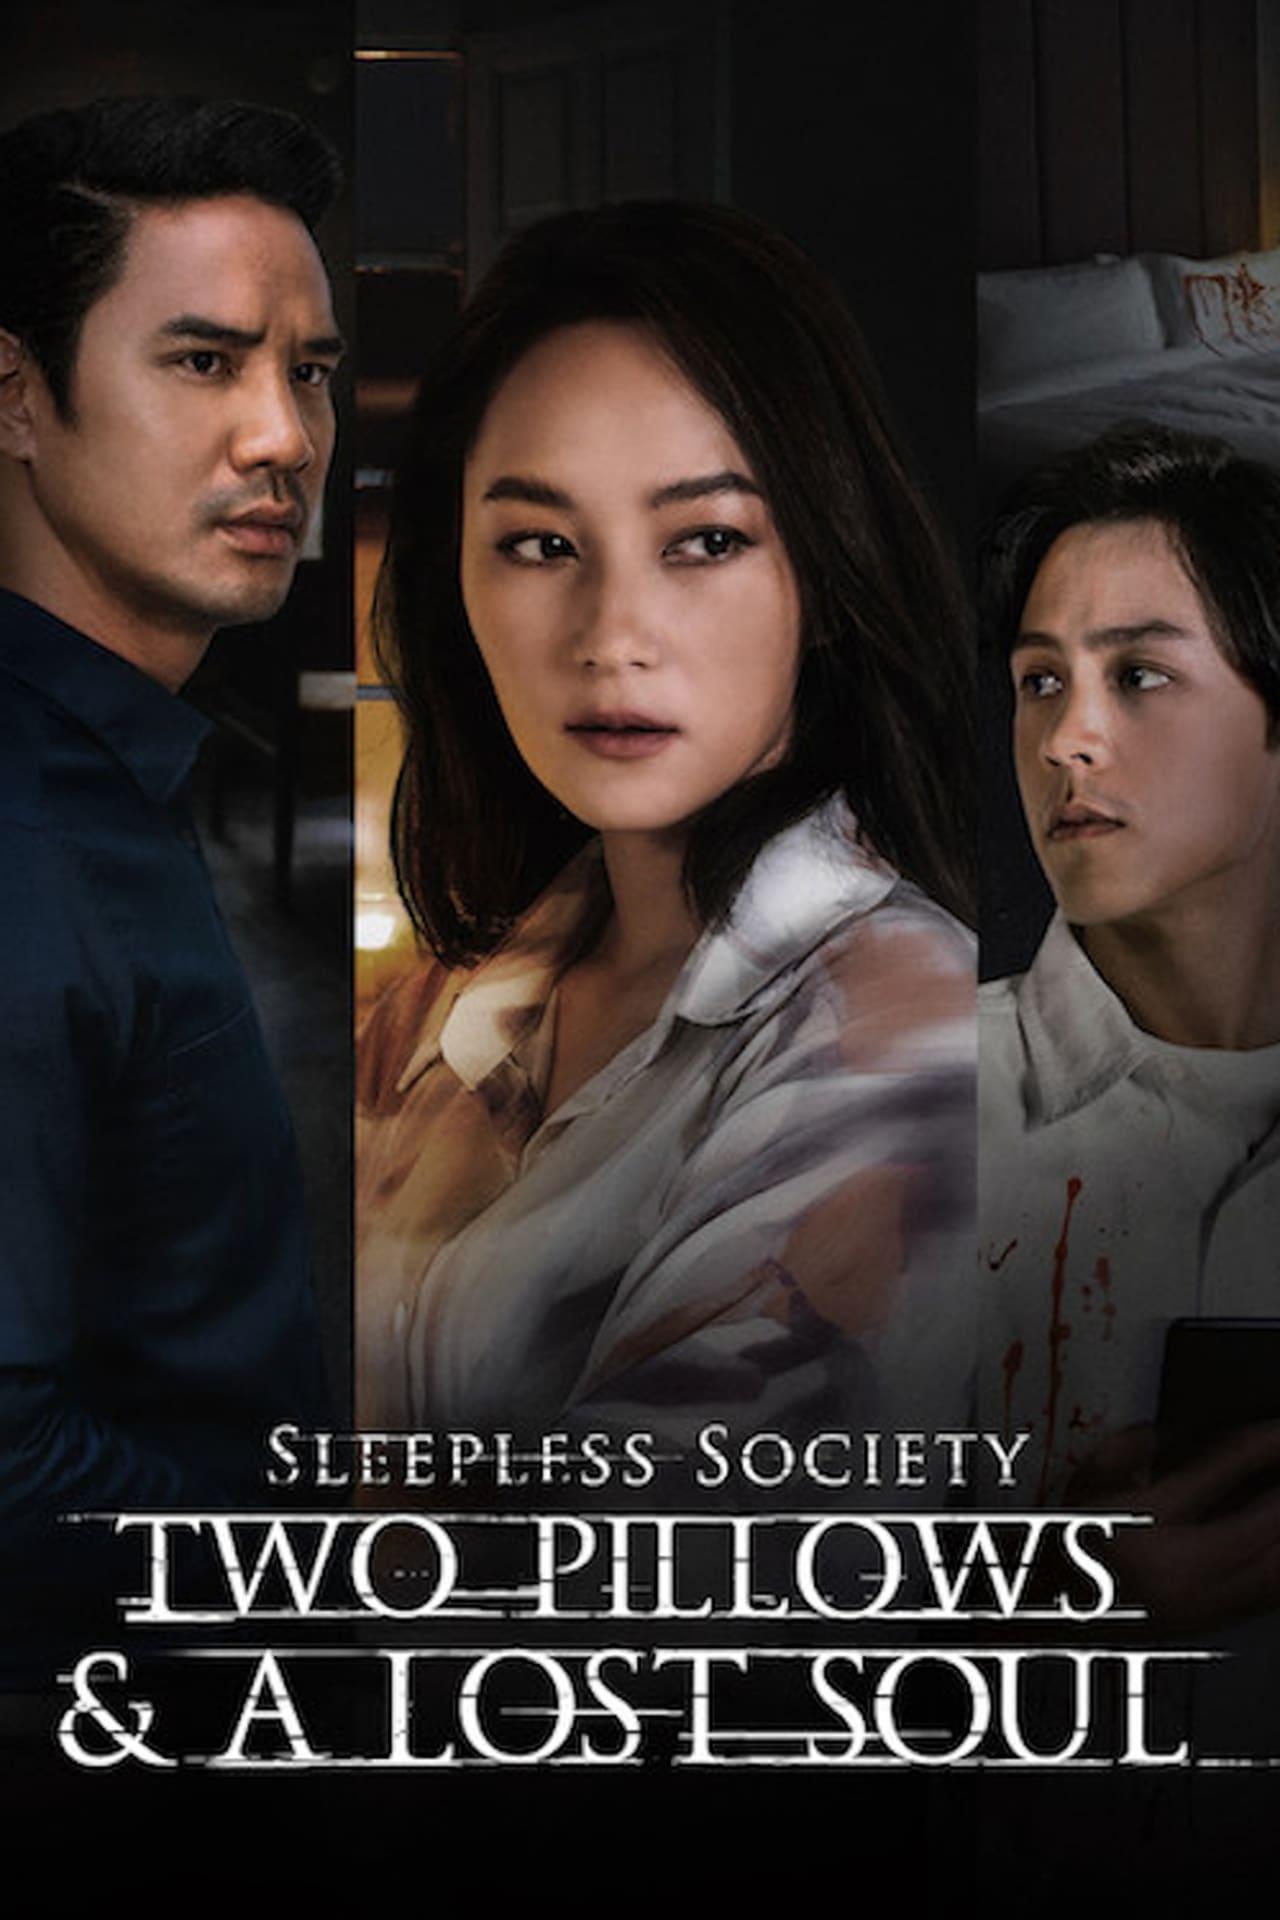 Sleepless Society: Two Pillows & A Lost Soul | awwrated | 你的 Netflix 避雷好幫手!